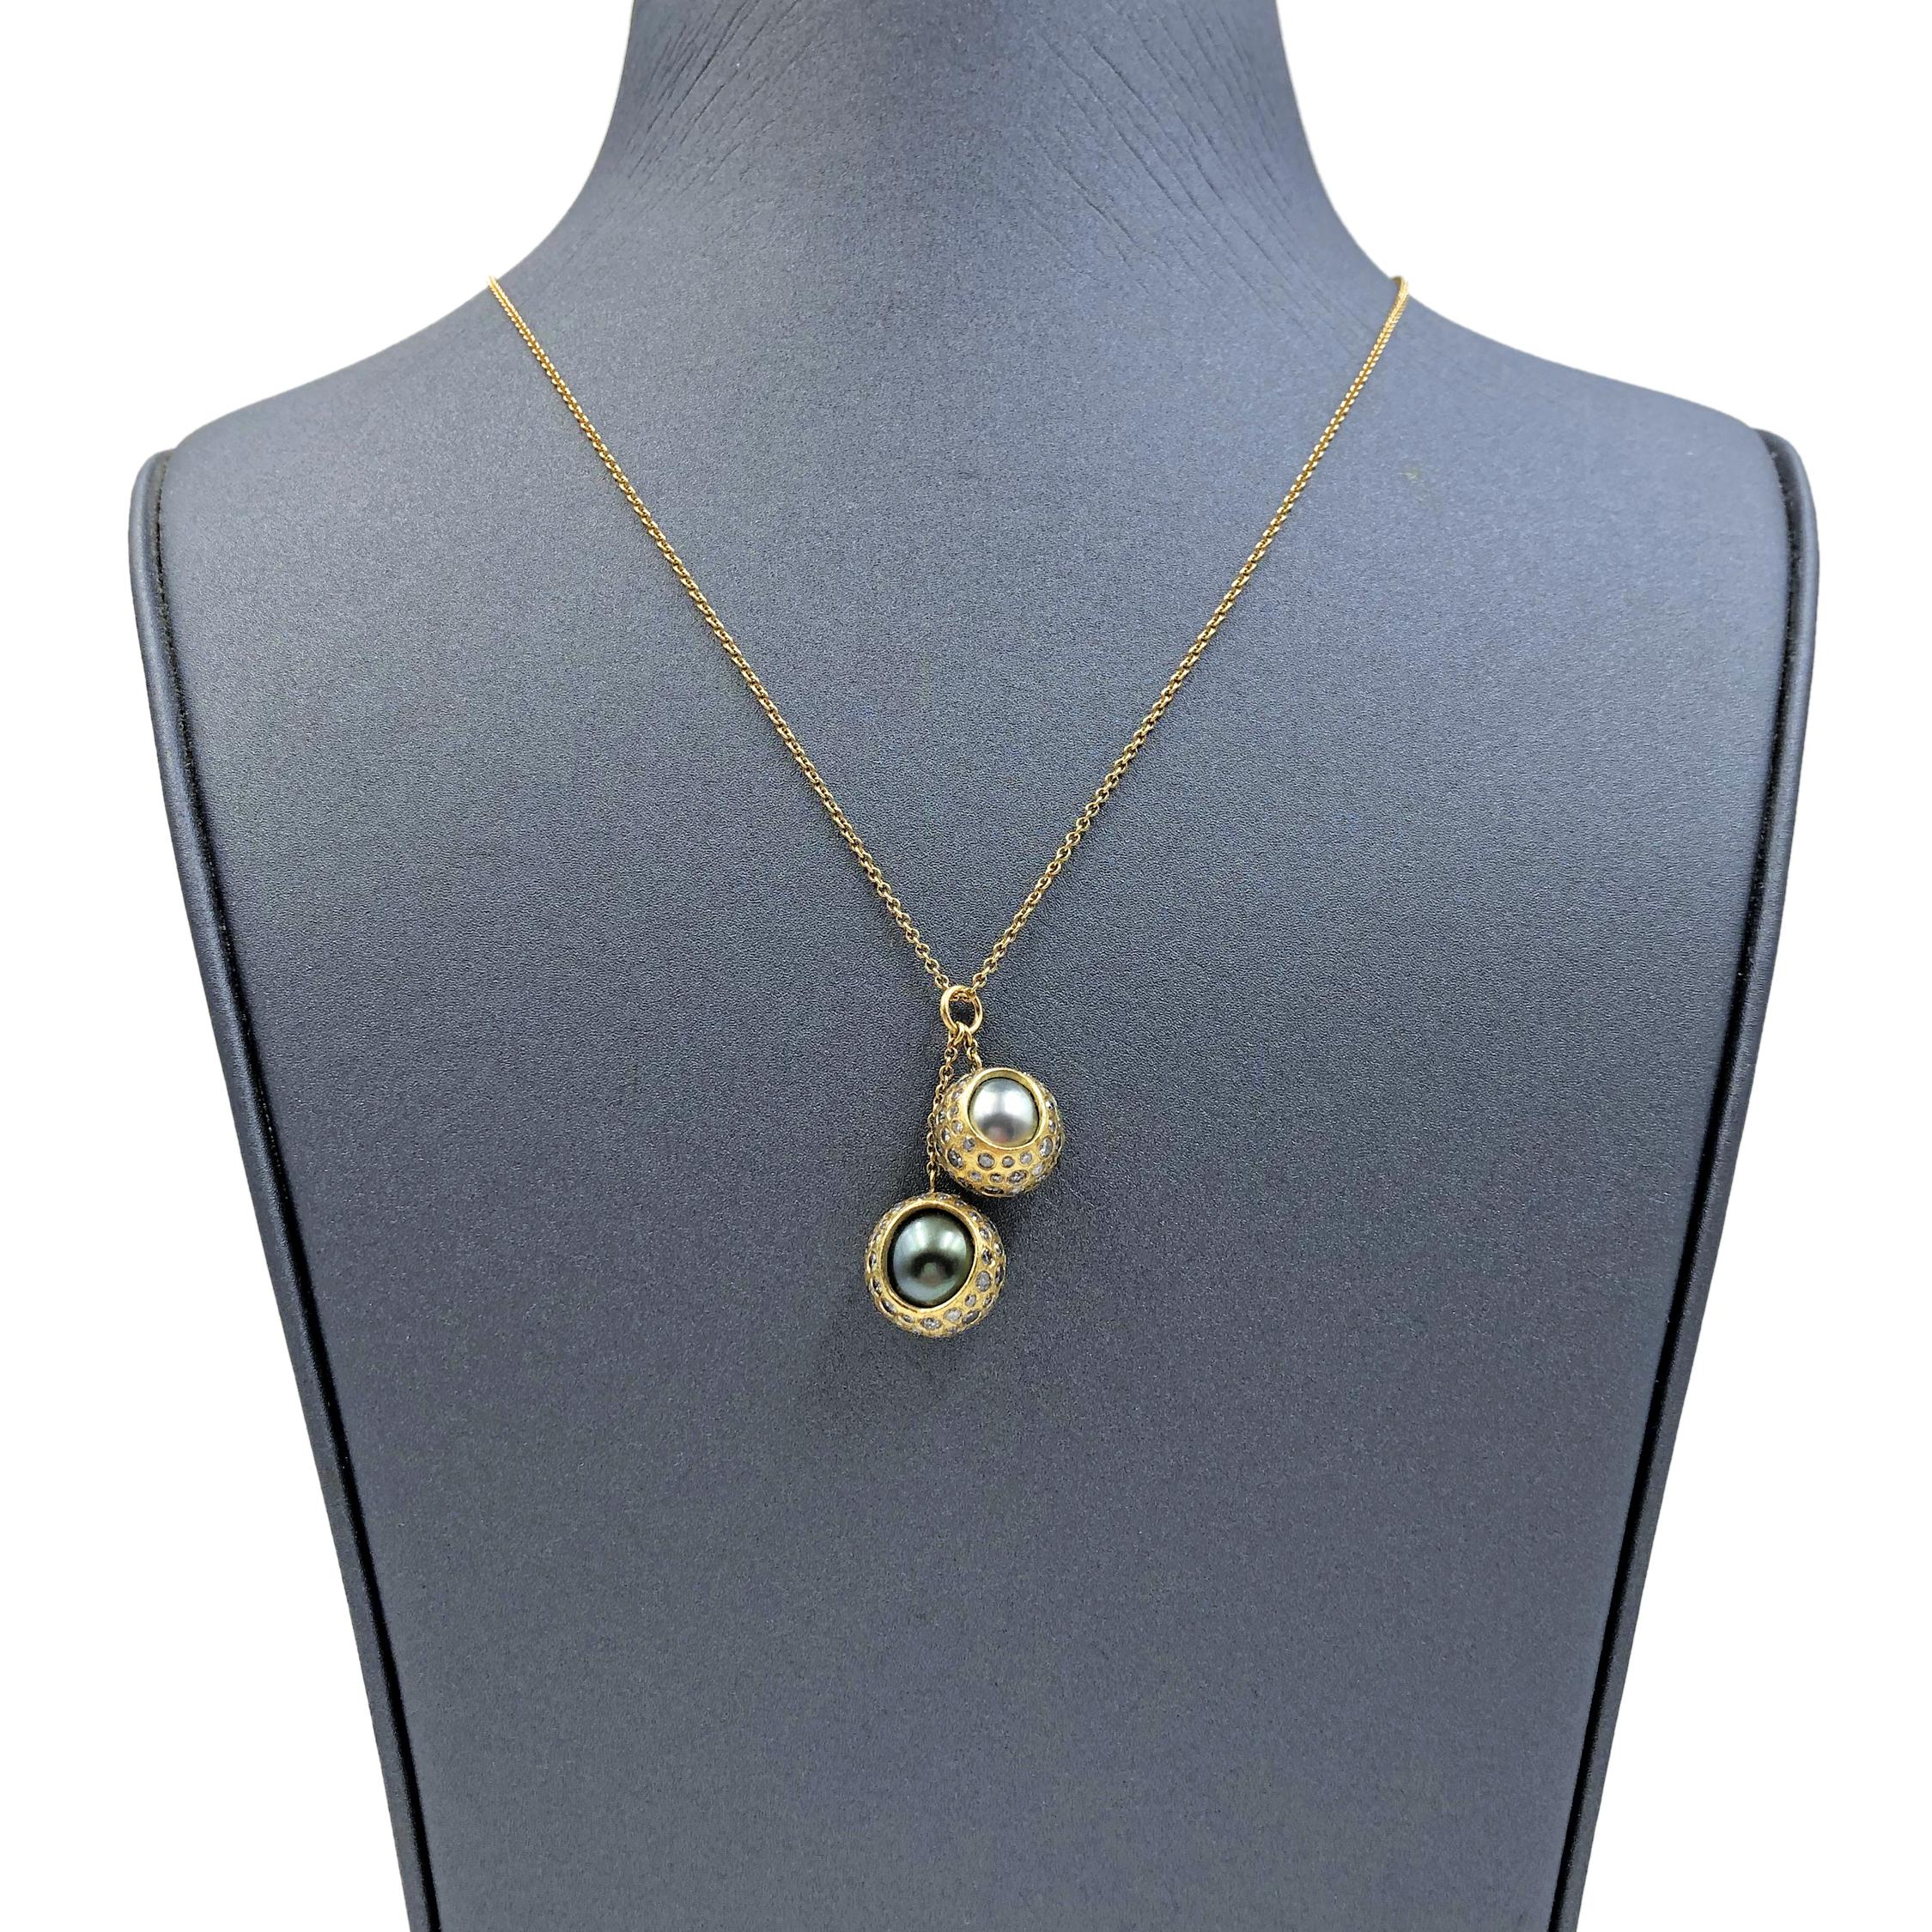 One of a Kind Tahitian Pearl Double Drop Necklace handmade by acclaimed jewelry artist Todd Reed in his signature-finished 18k yellow gold featuring two lustrous Tahitian pearls surrounded by 2.56 total carats of round brilliant-cut diamonds and